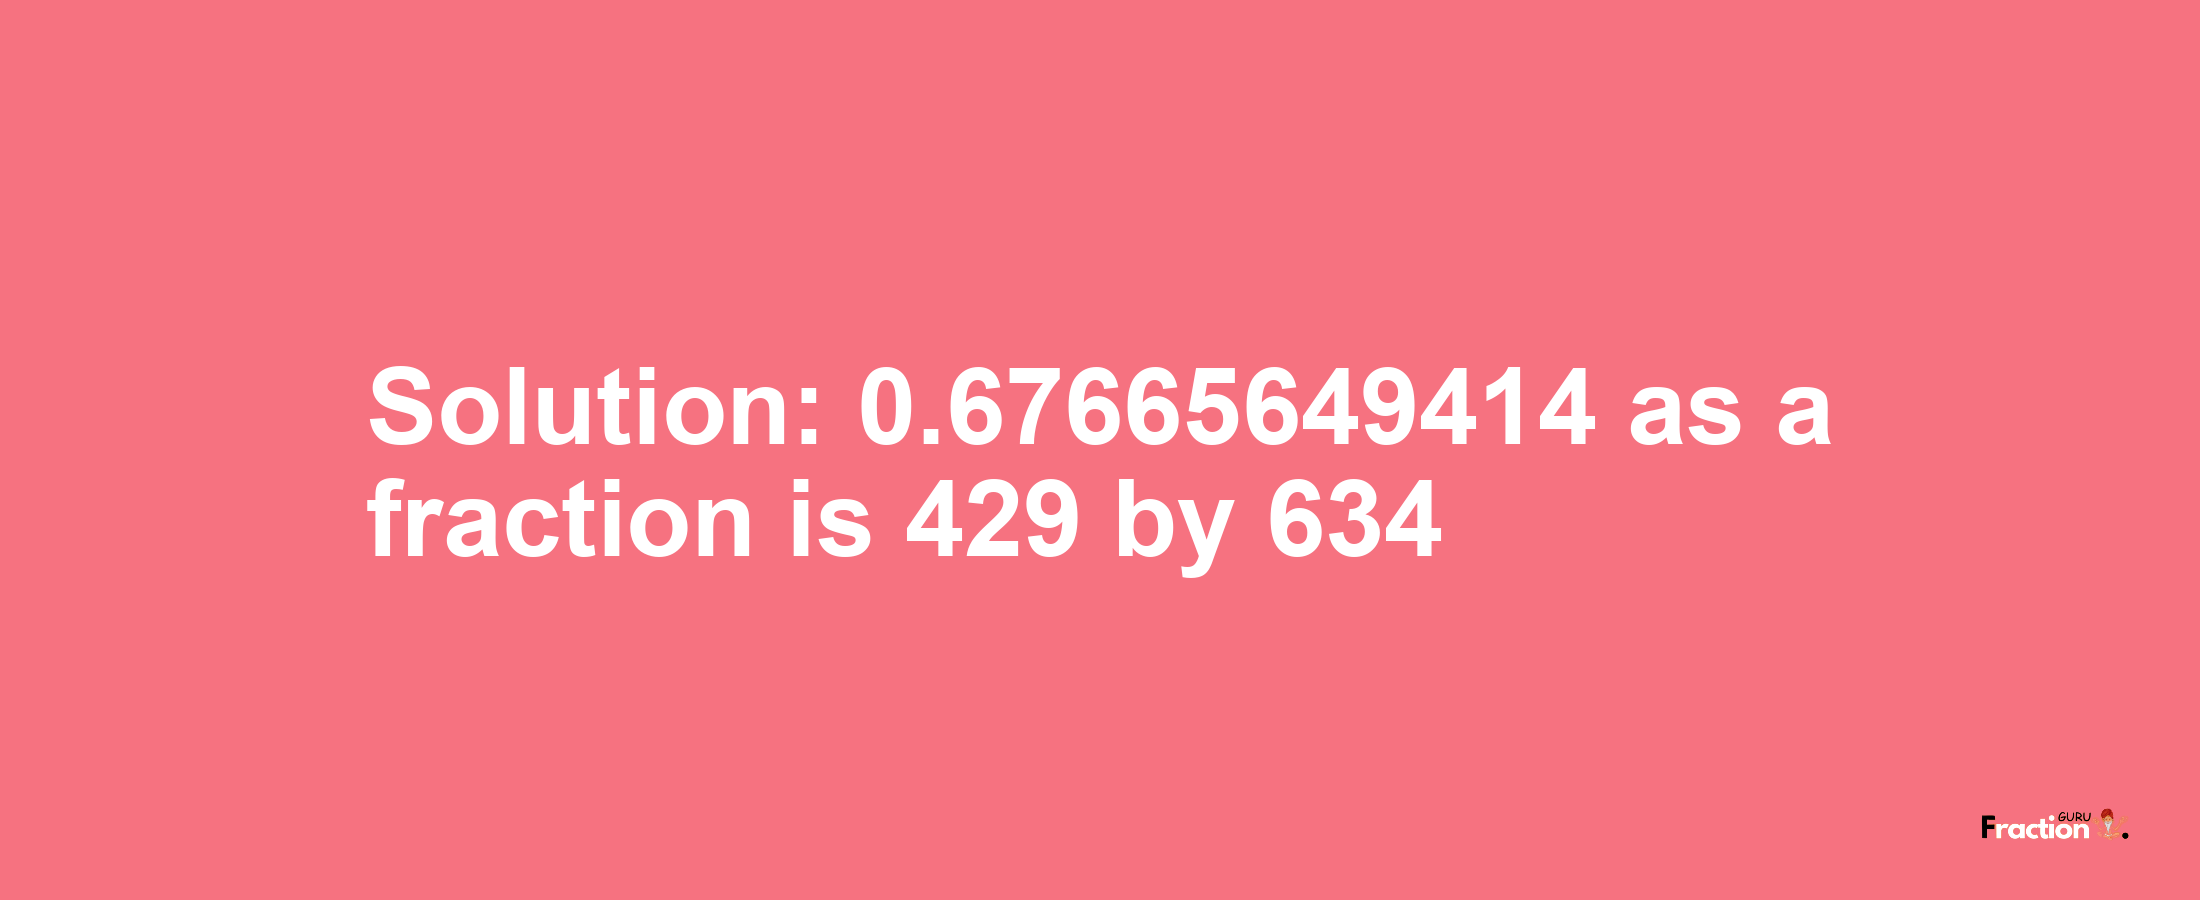 Solution:0.67665649414 as a fraction is 429/634